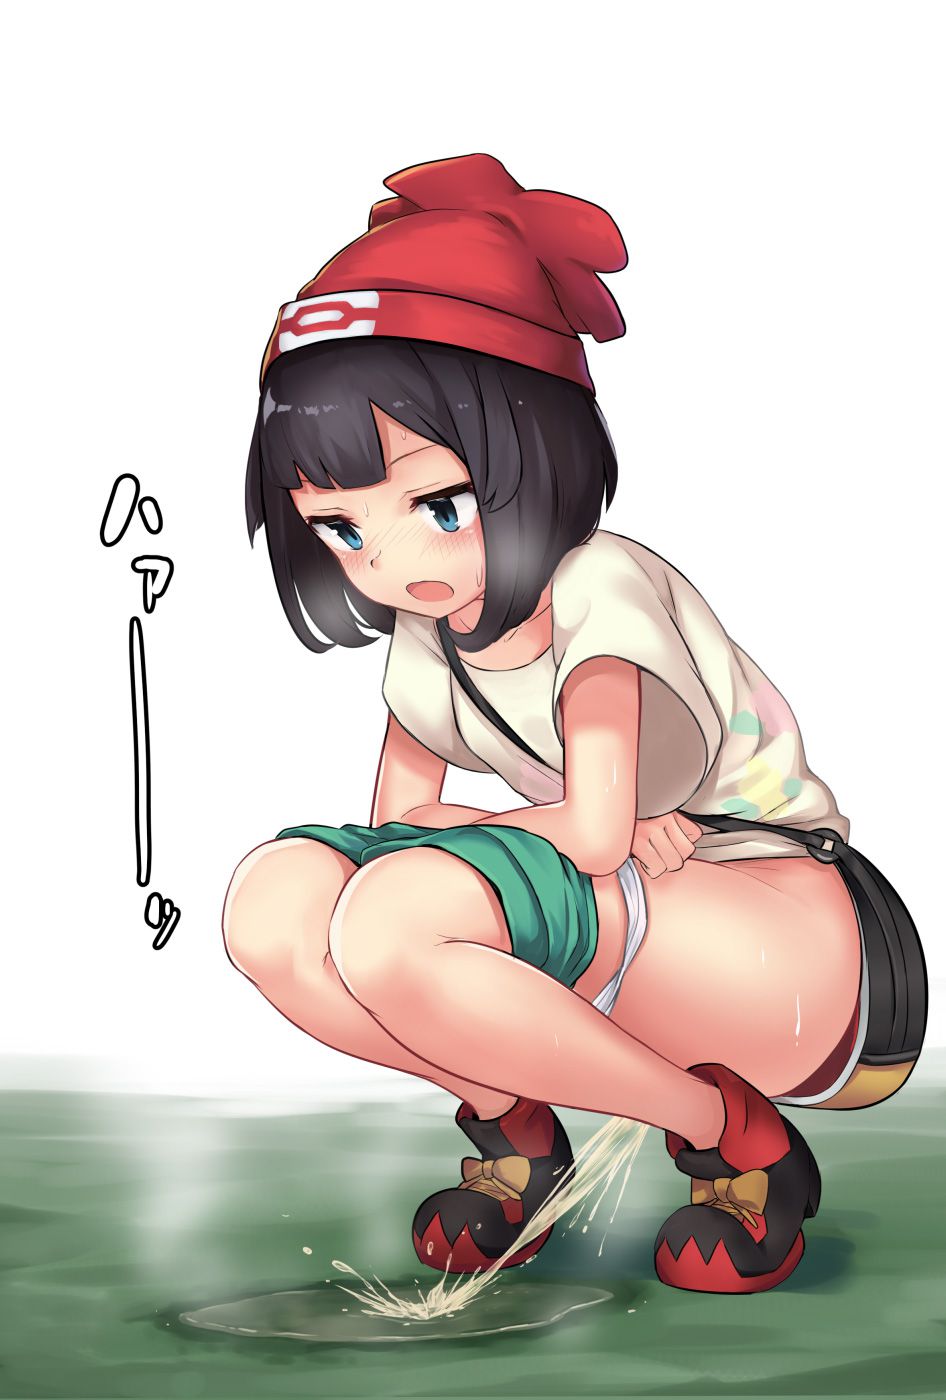 【Secondary】Erotic image of "Nochon Girl" who has no toilet nearby and is reluctantly peeing in the bushes around it 31